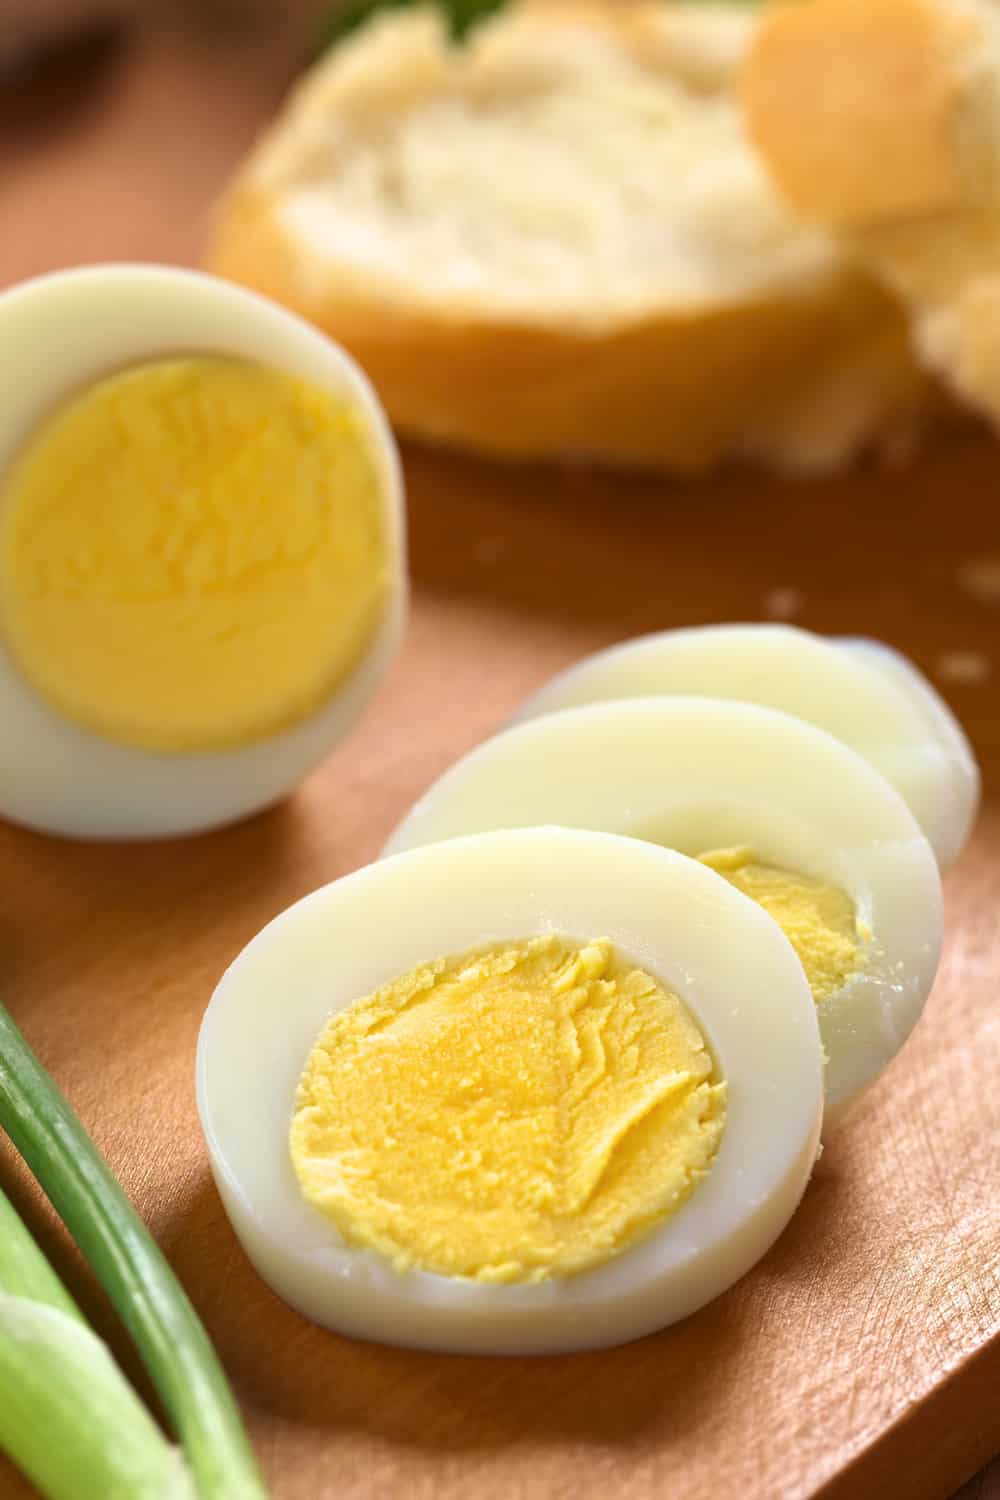 Can you freeze Hard-Boiled Eggs